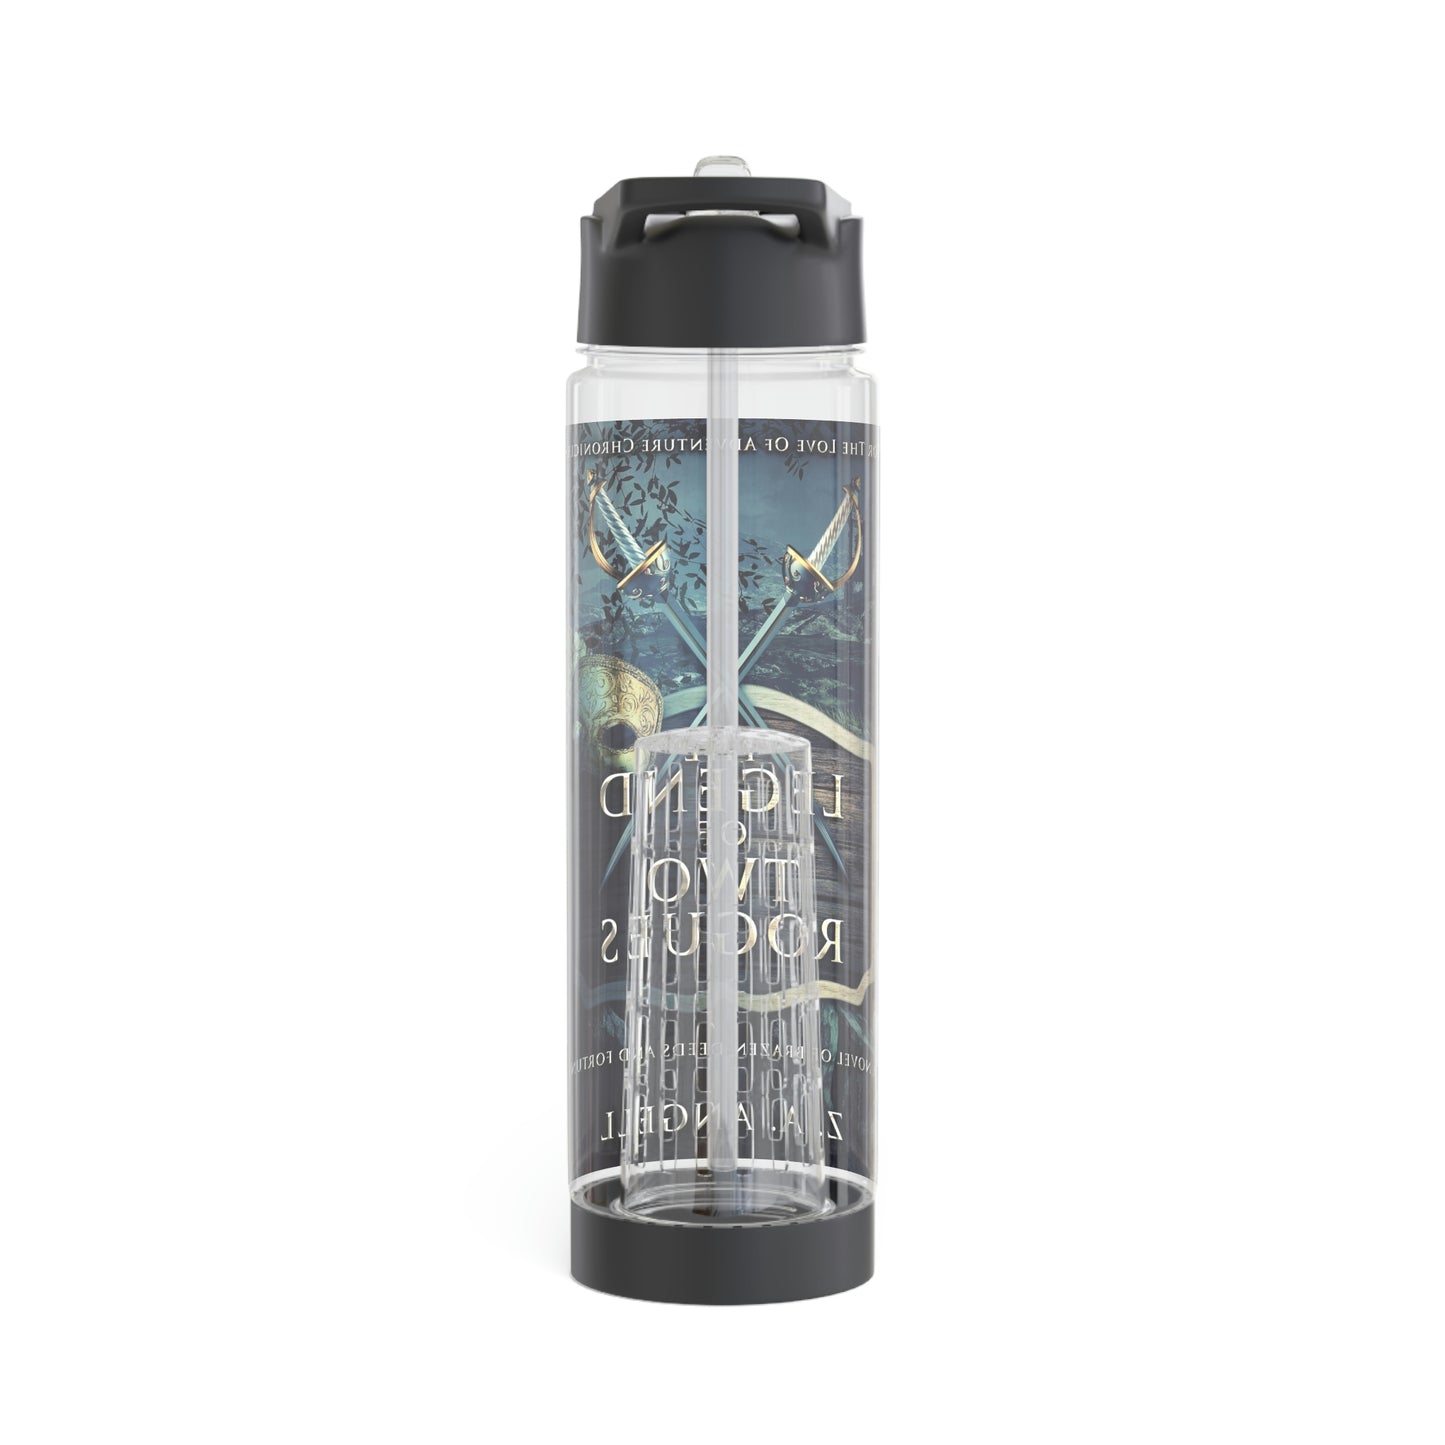 The Legend Of Two Rogues - Infuser Water Bottle